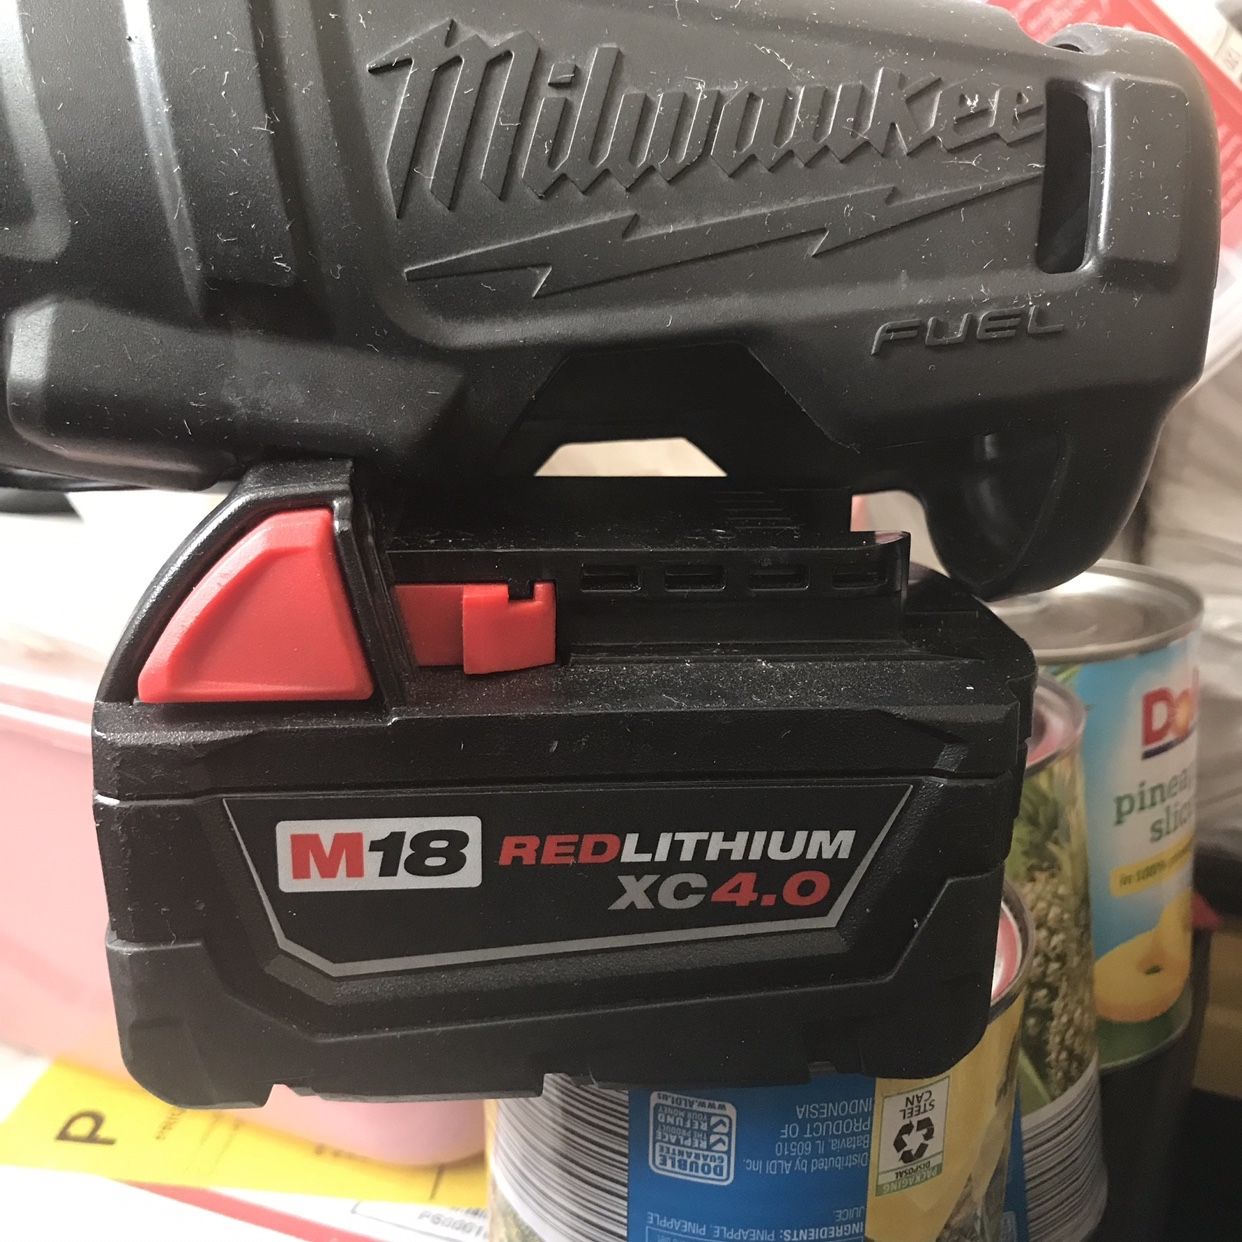 MILWAUKEE M18 IMPACT WRENCH BOOTH& BATTERY